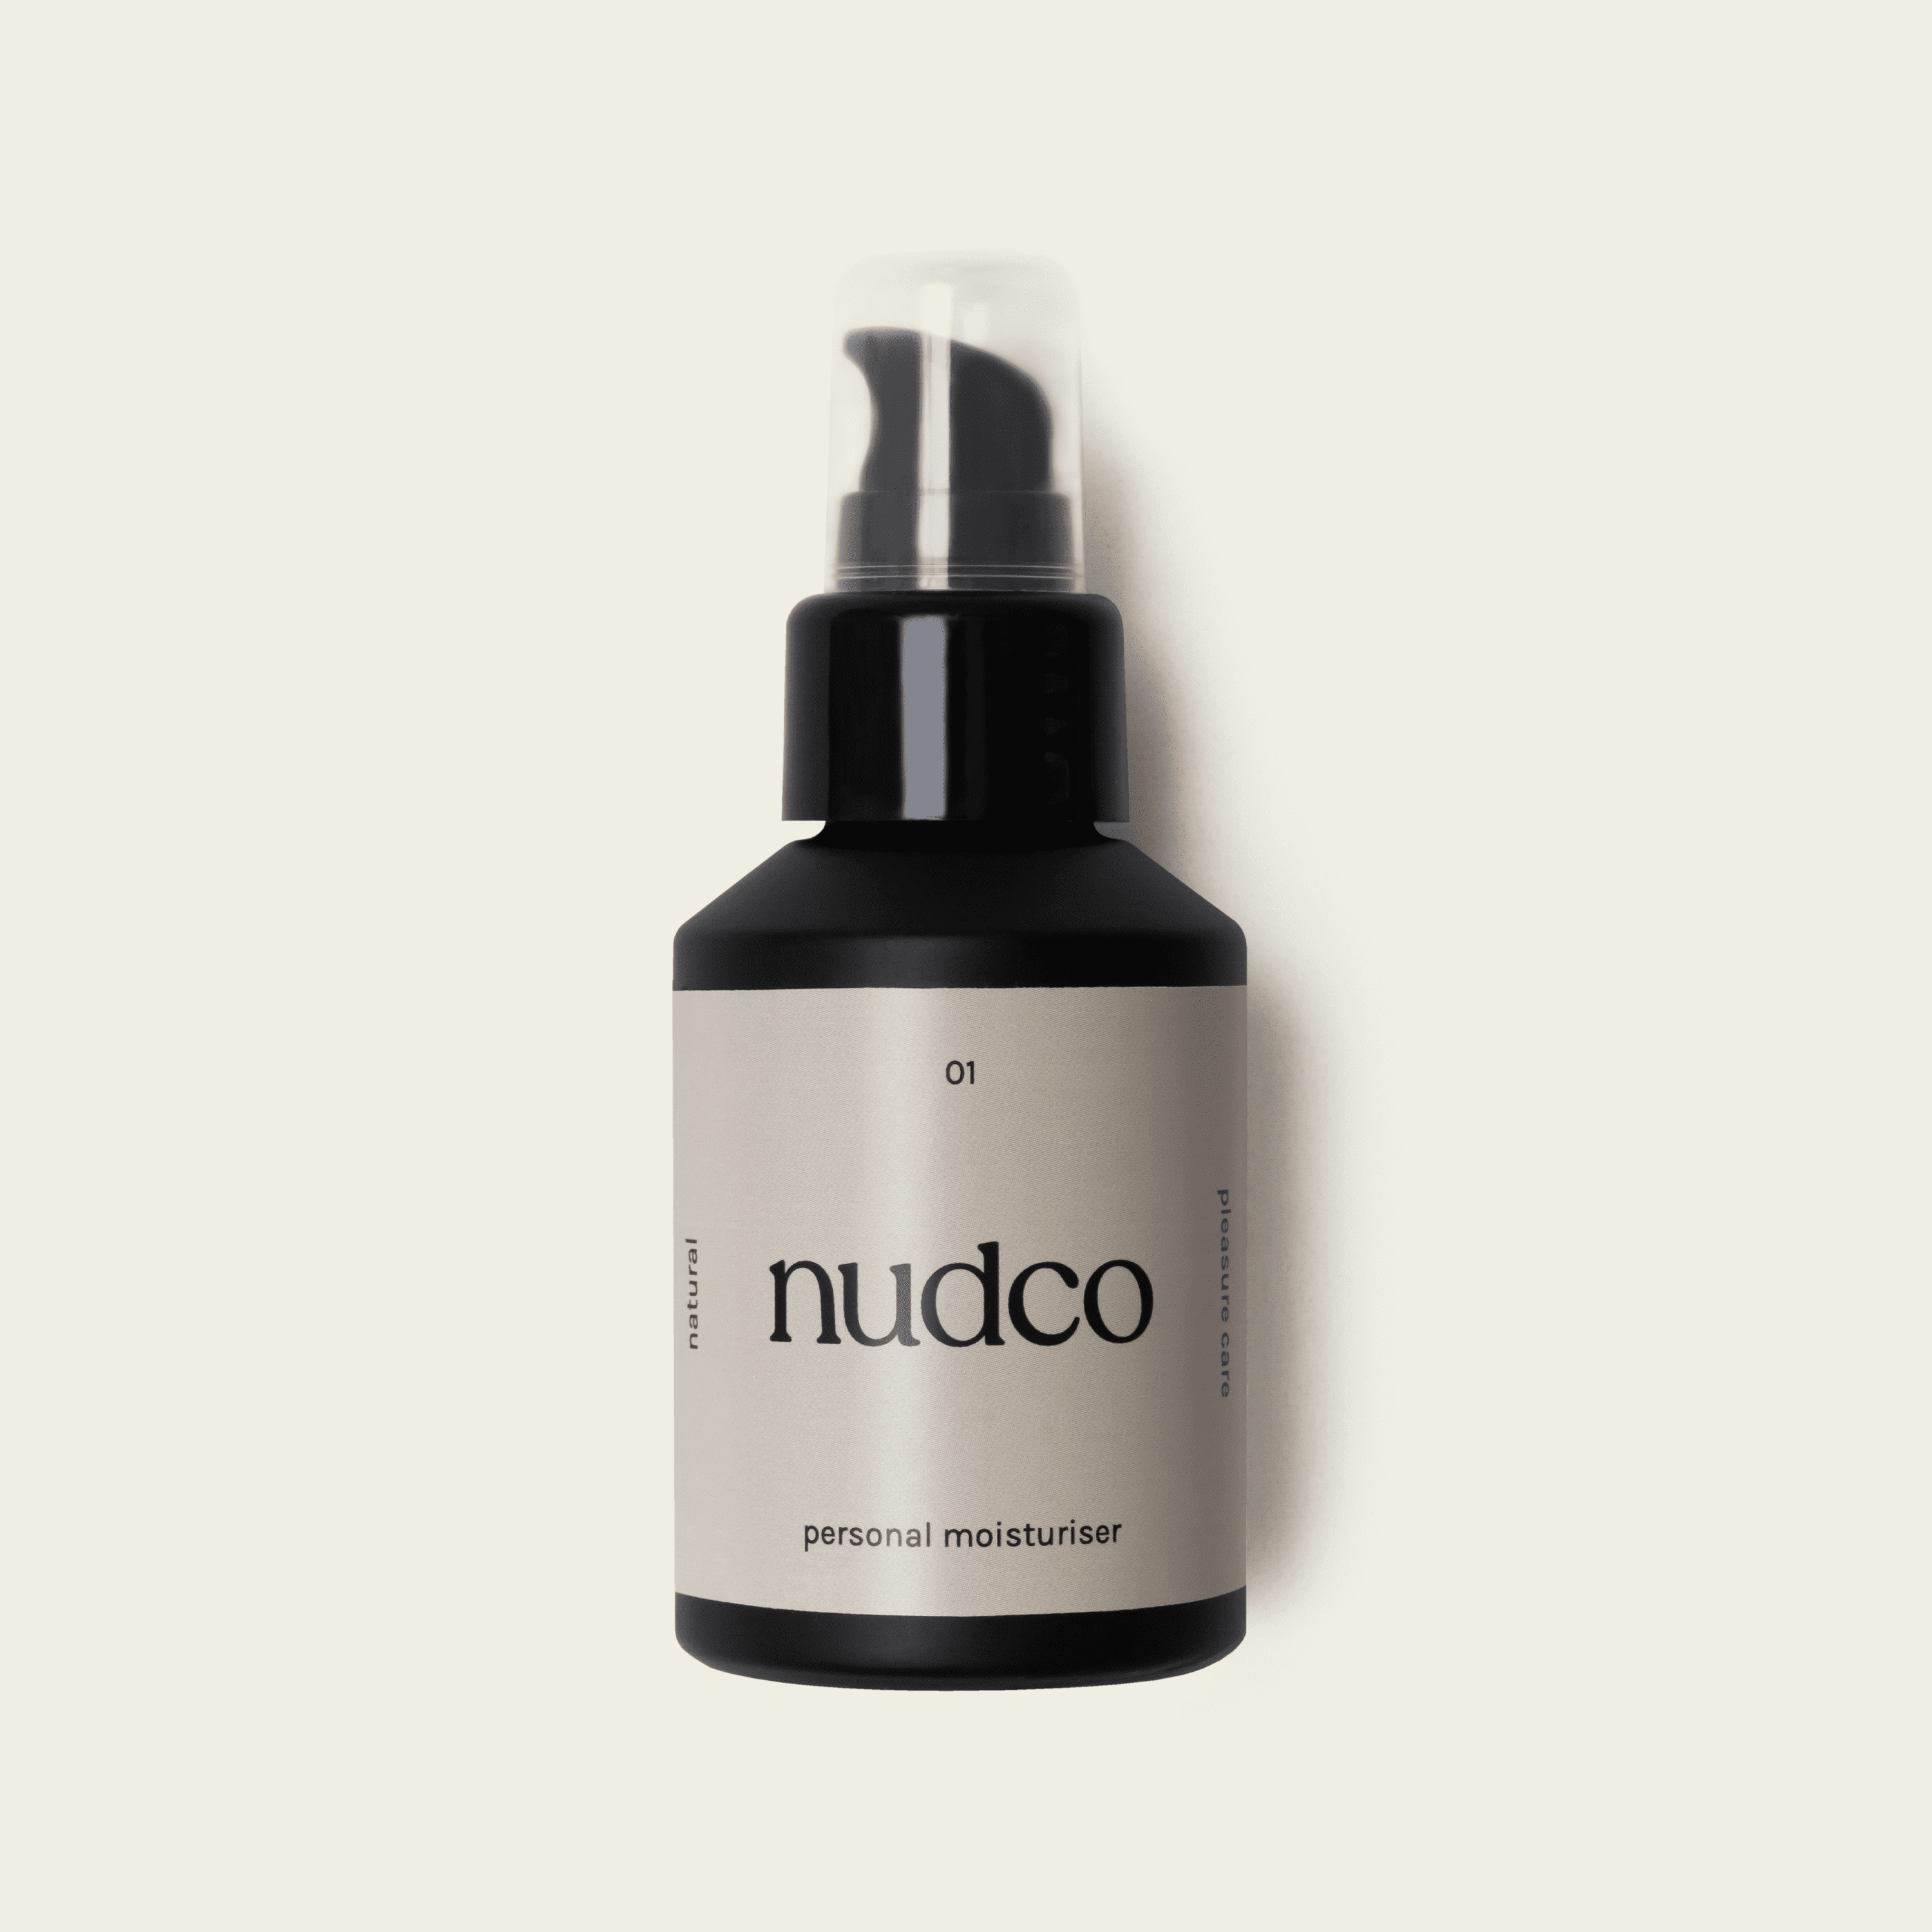 nudco intimate lubricant 